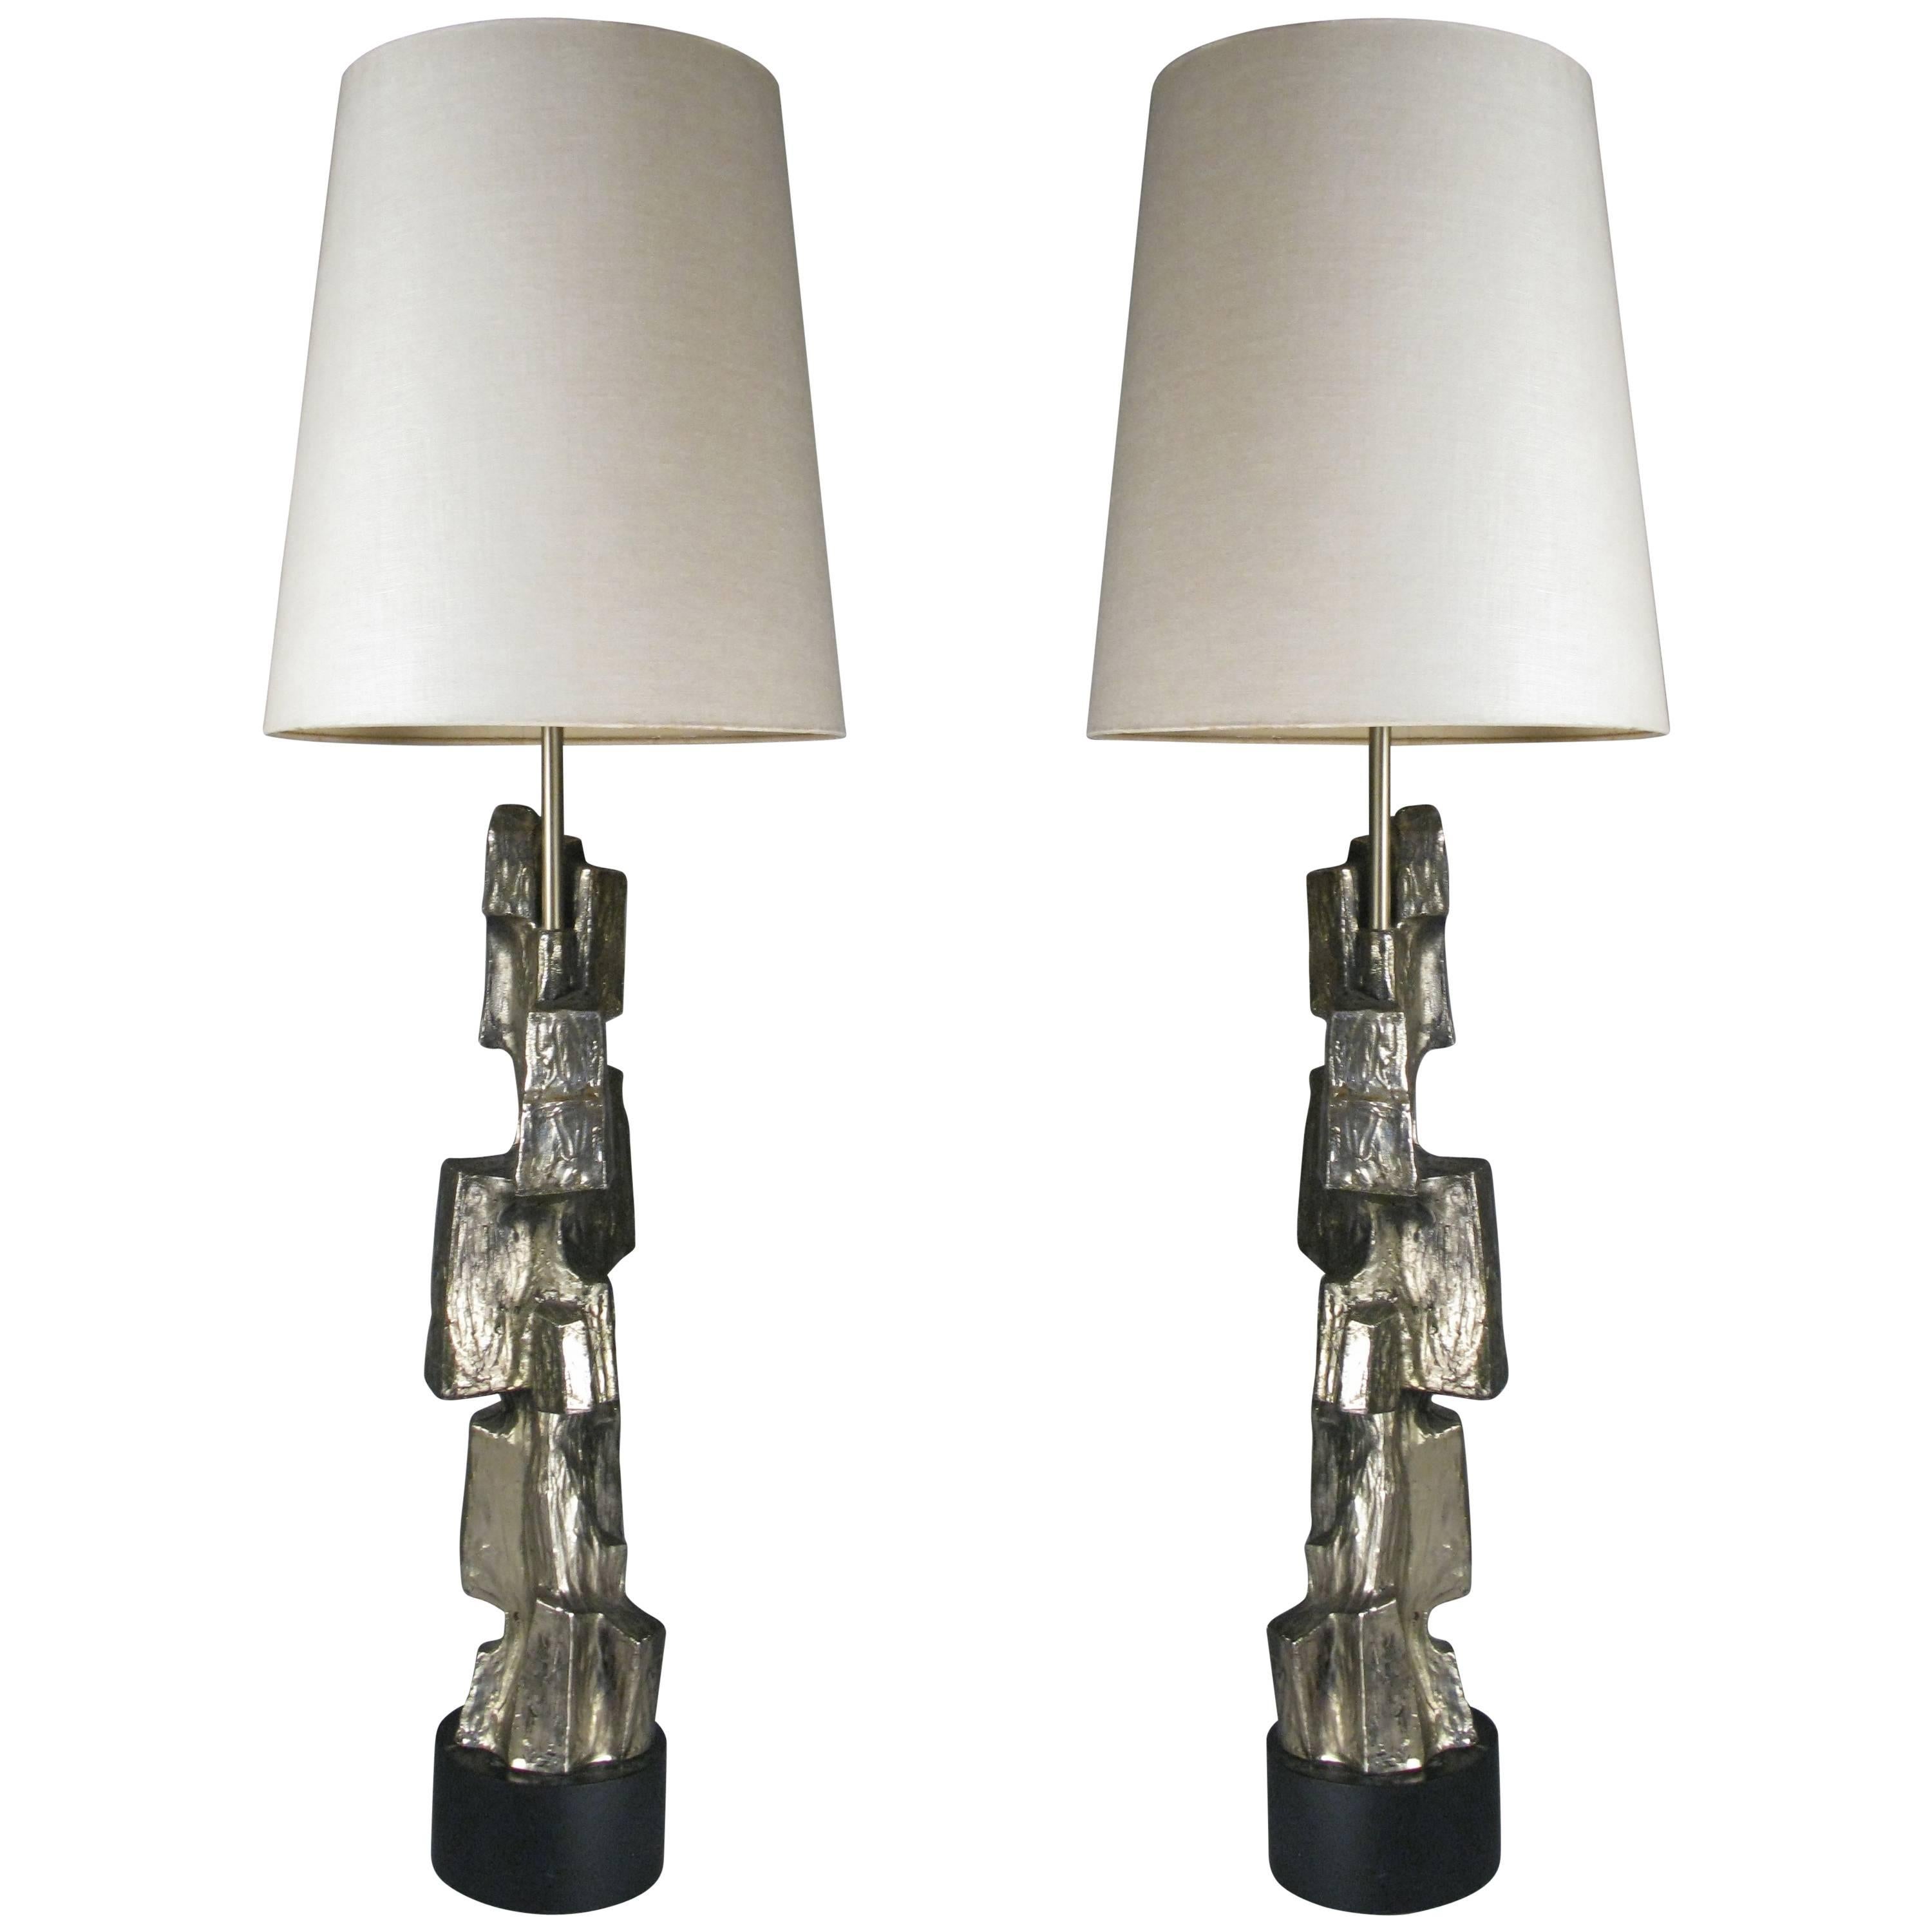 Pair of Sculptural 1970s Bronze Lamps attributed to Richard Barr